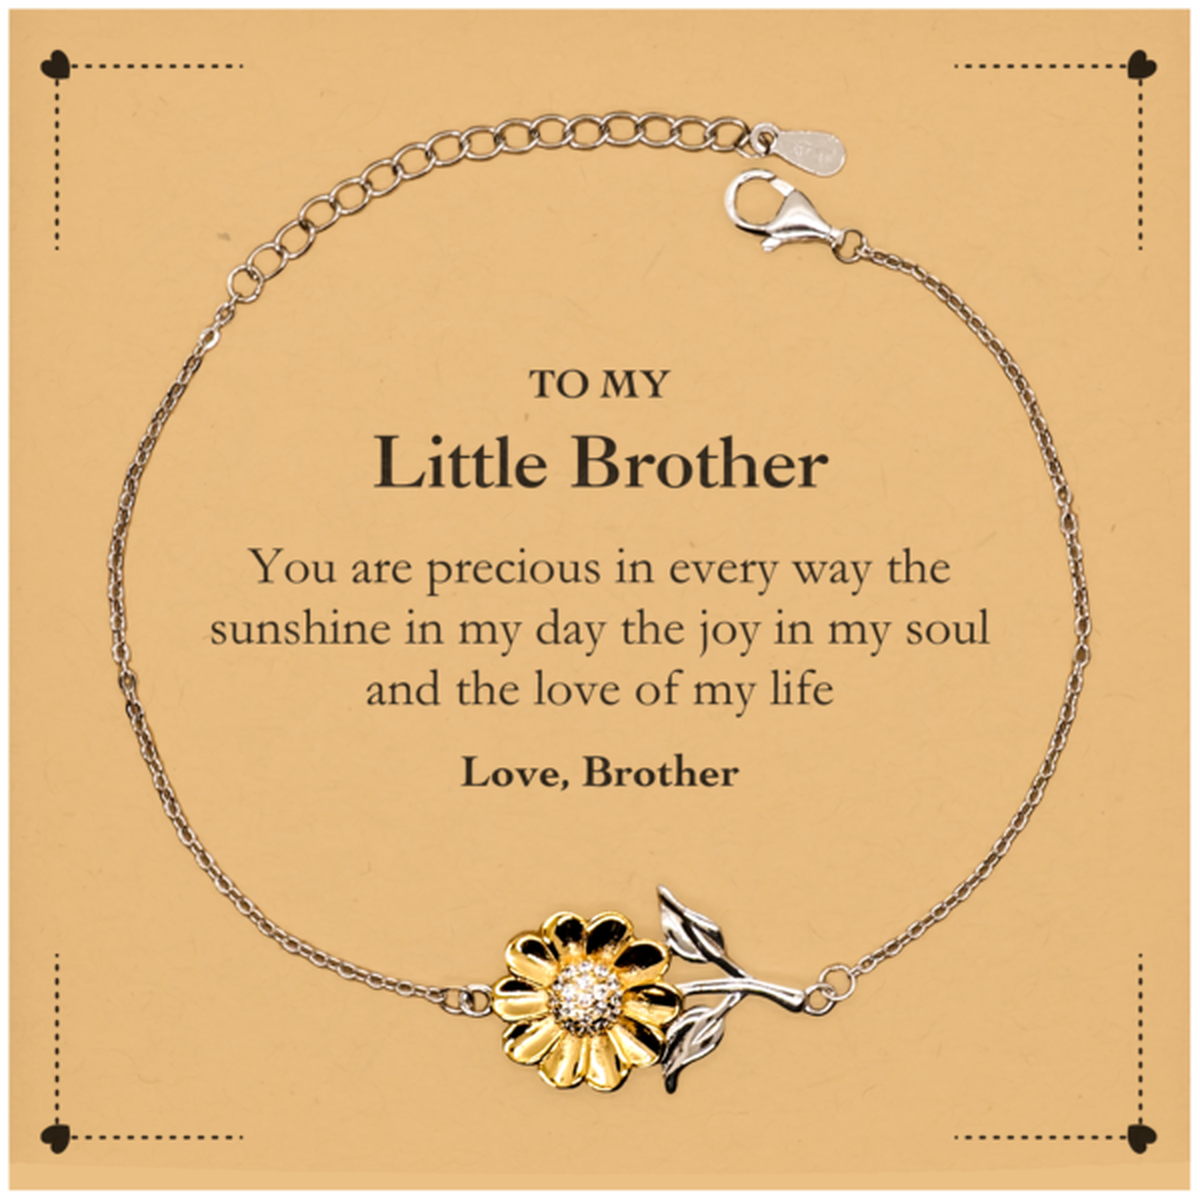 Graduation Gifts for Little Brother Sunflower Bracelet Present from Brother, Christmas Little Brother Birthday Gifts Little Brother You are precious in every way the sunshine in my day. Love, Brother